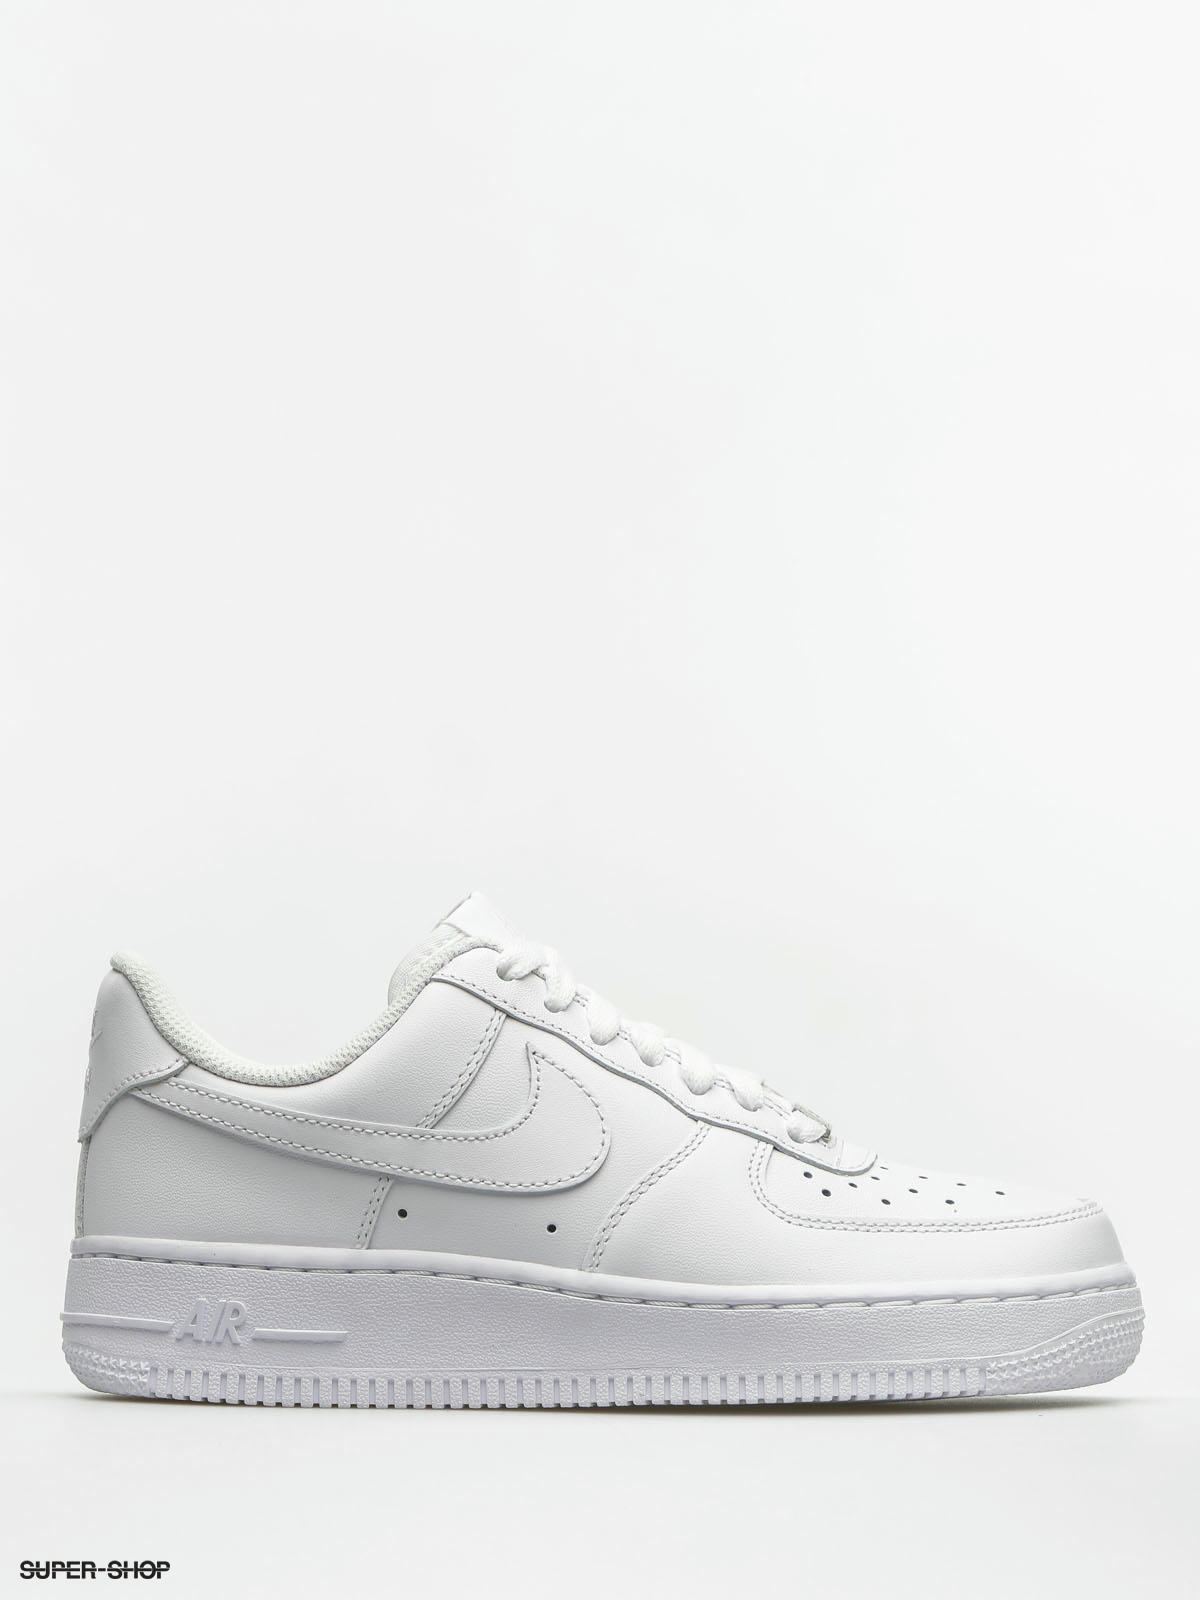 Nike Air Force 1 07 Shoes Wmn (white/white)